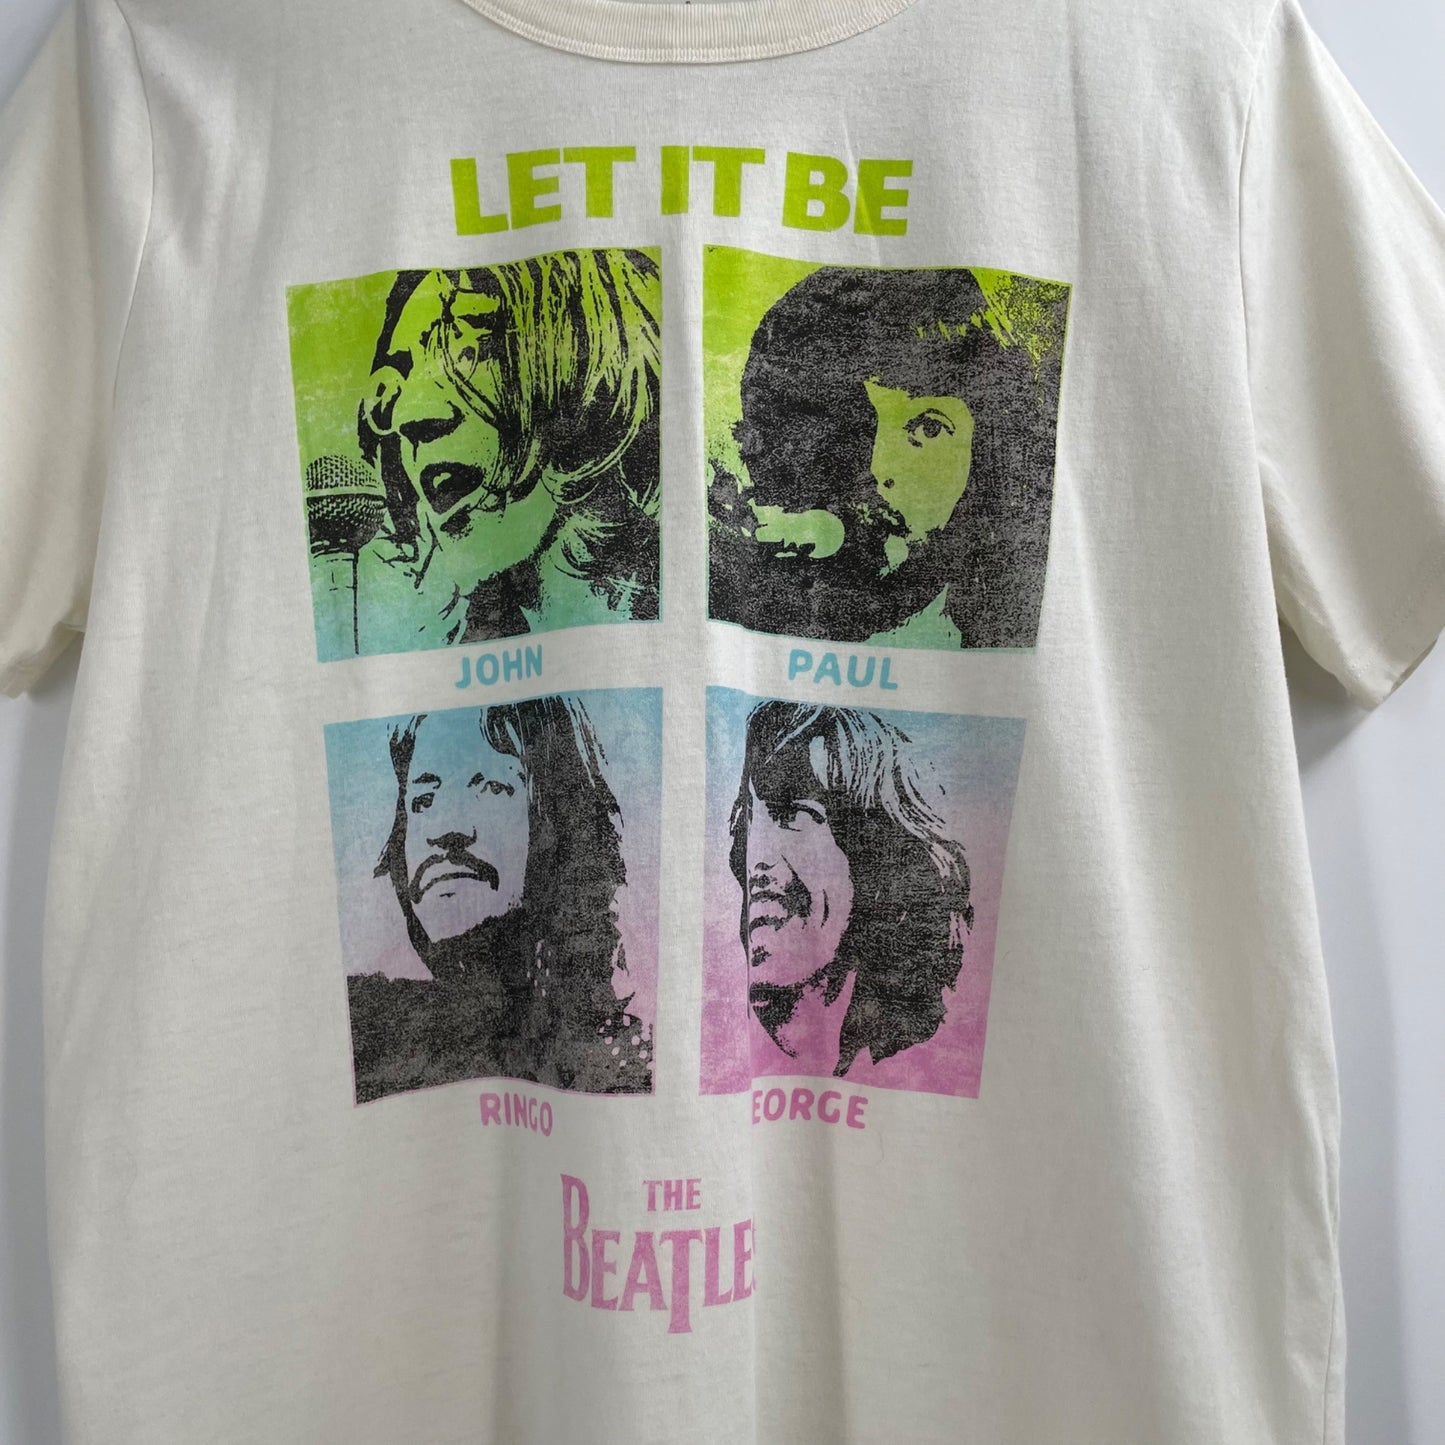 The Beatles "Let it Be" Short Sleeve Graphic Band T-Shirt Womens Size XL